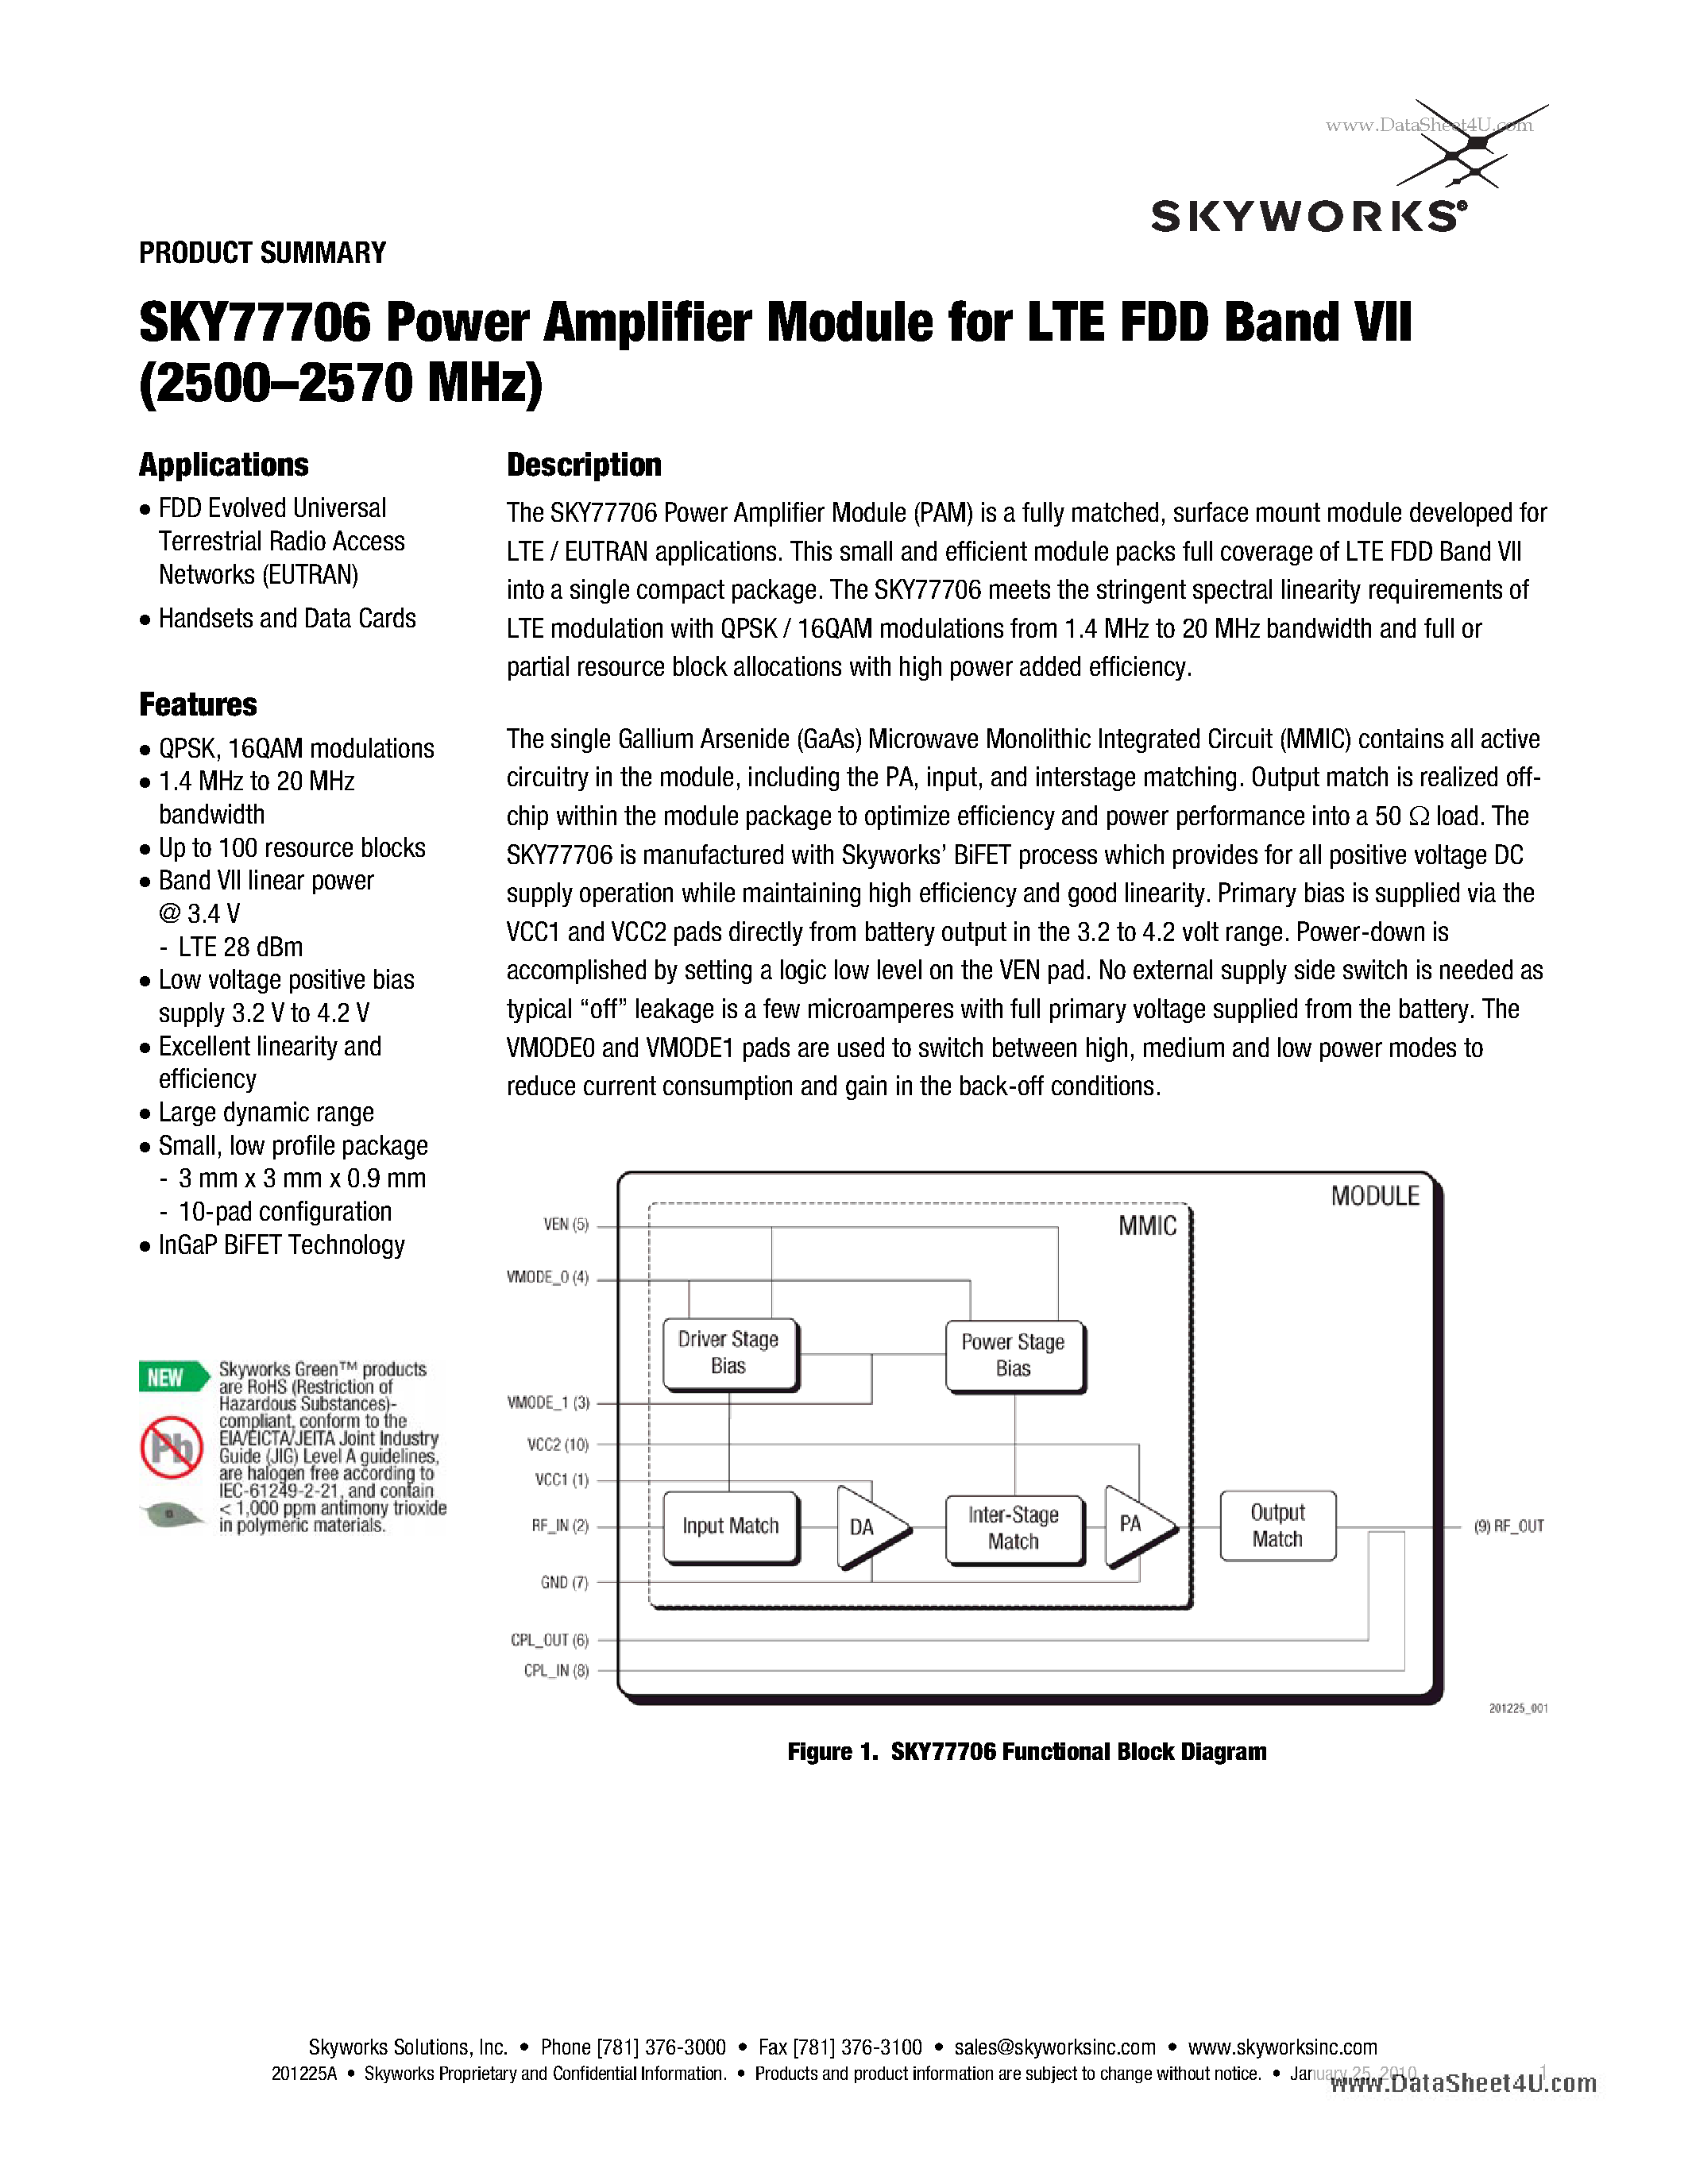 Даташит SKY77706 - Power Amplifier Module For LTE FDD Band VII (2500-2570 MHz) страница 1